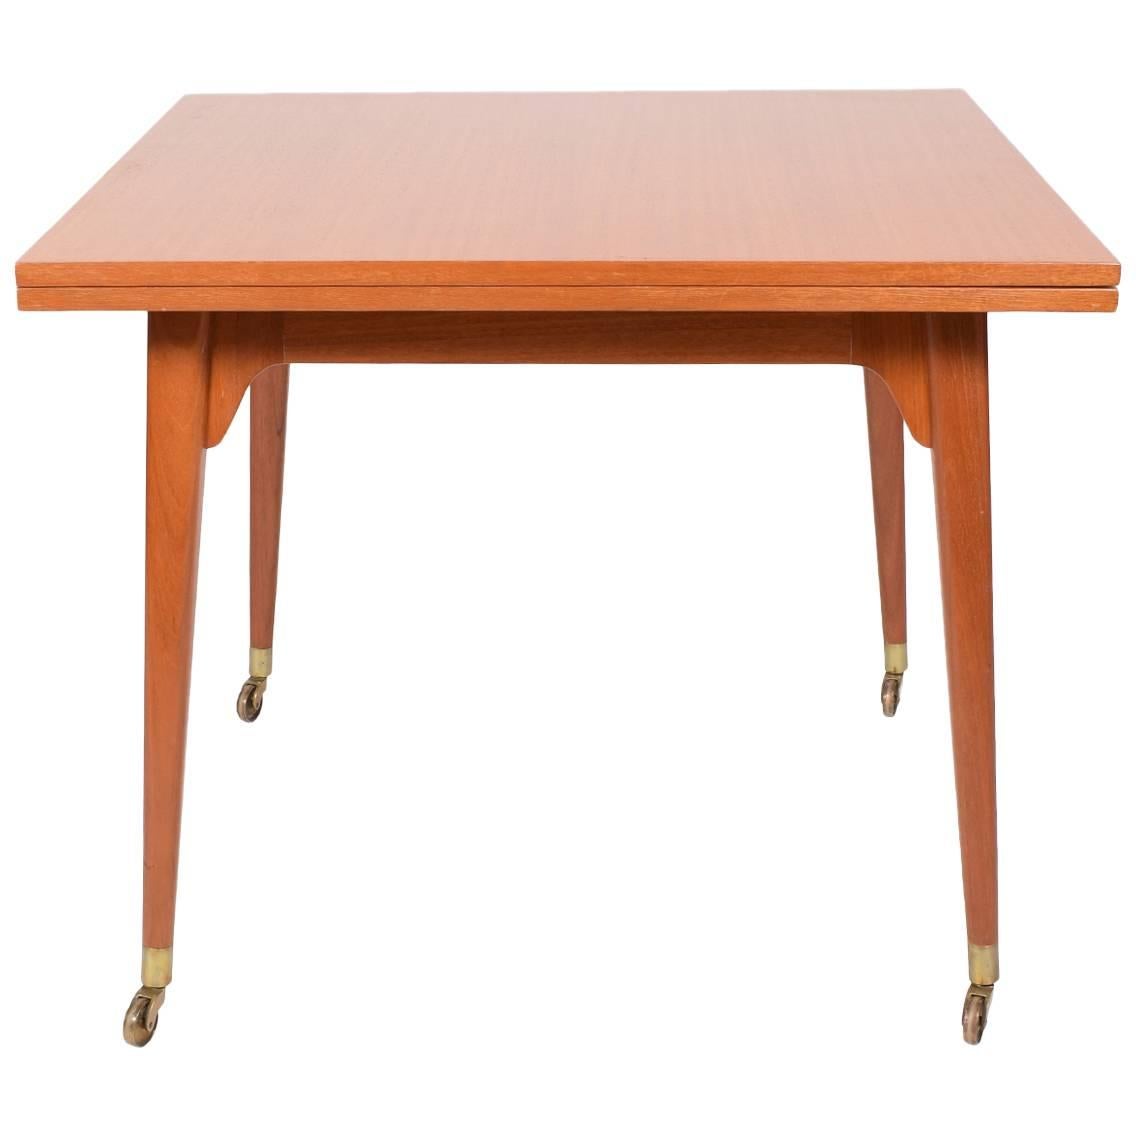 Game Table by Edward Wormley for Dunbar